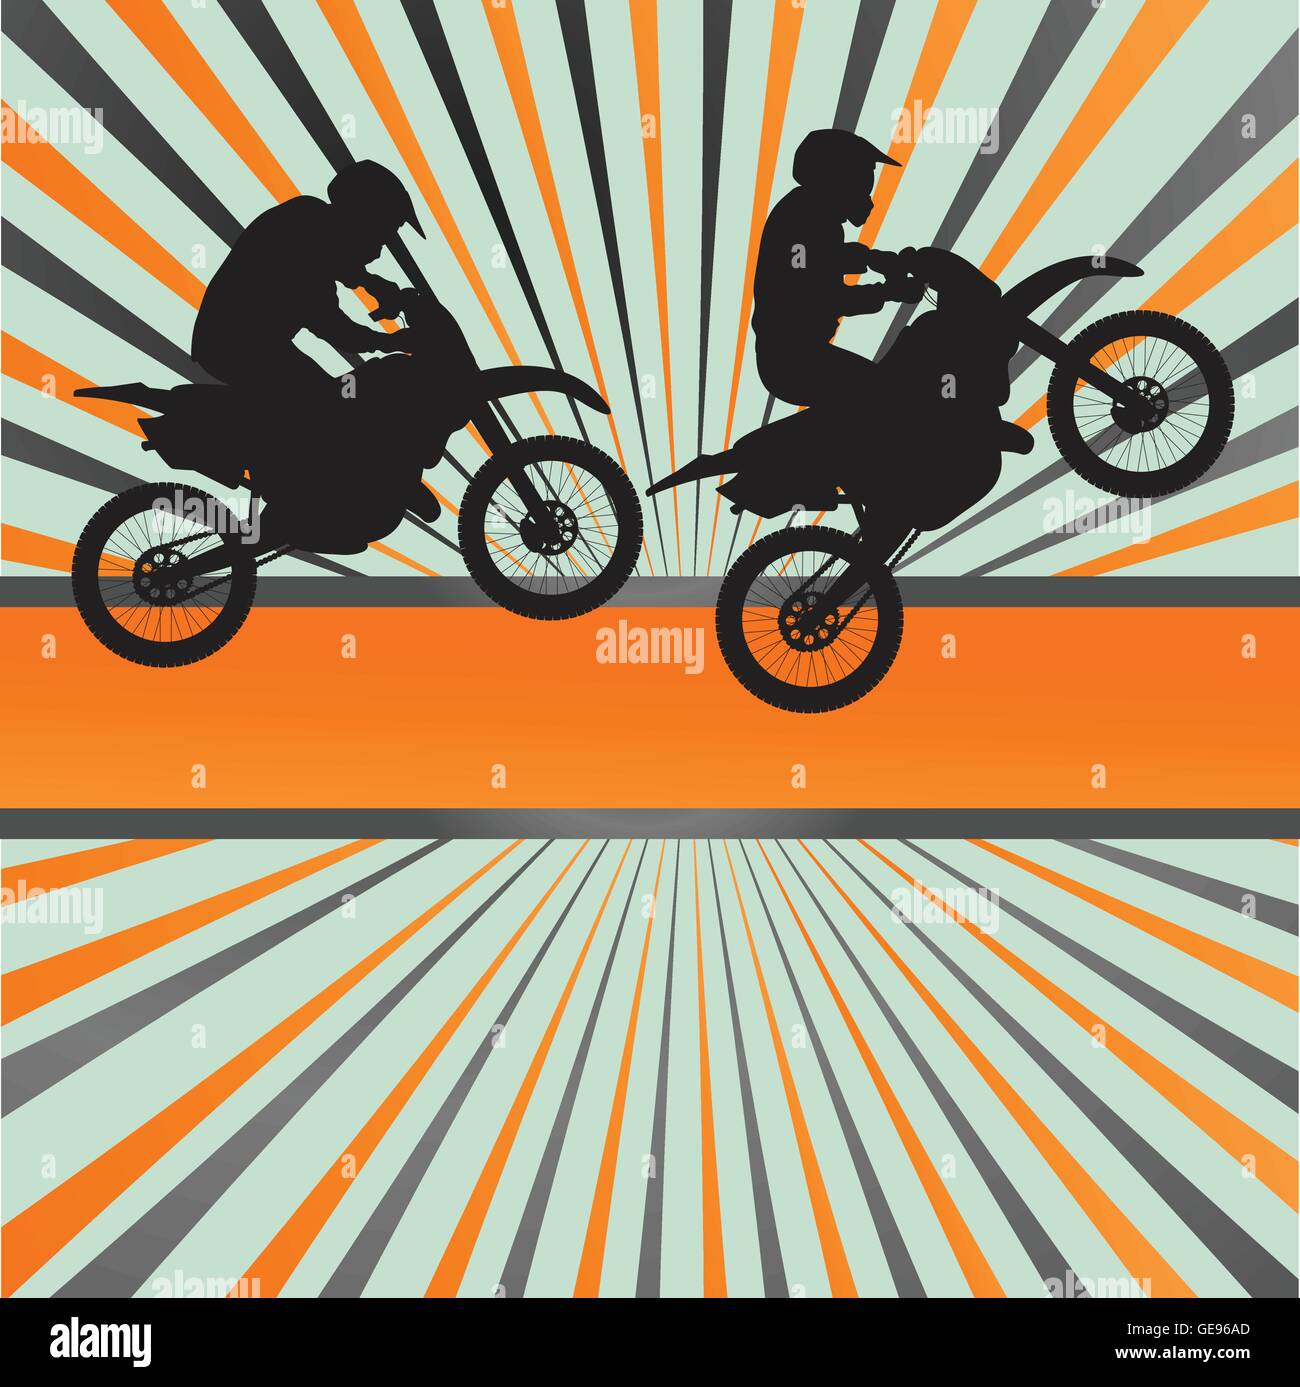 Race motorcycle burst vector background for poster Stock Vector